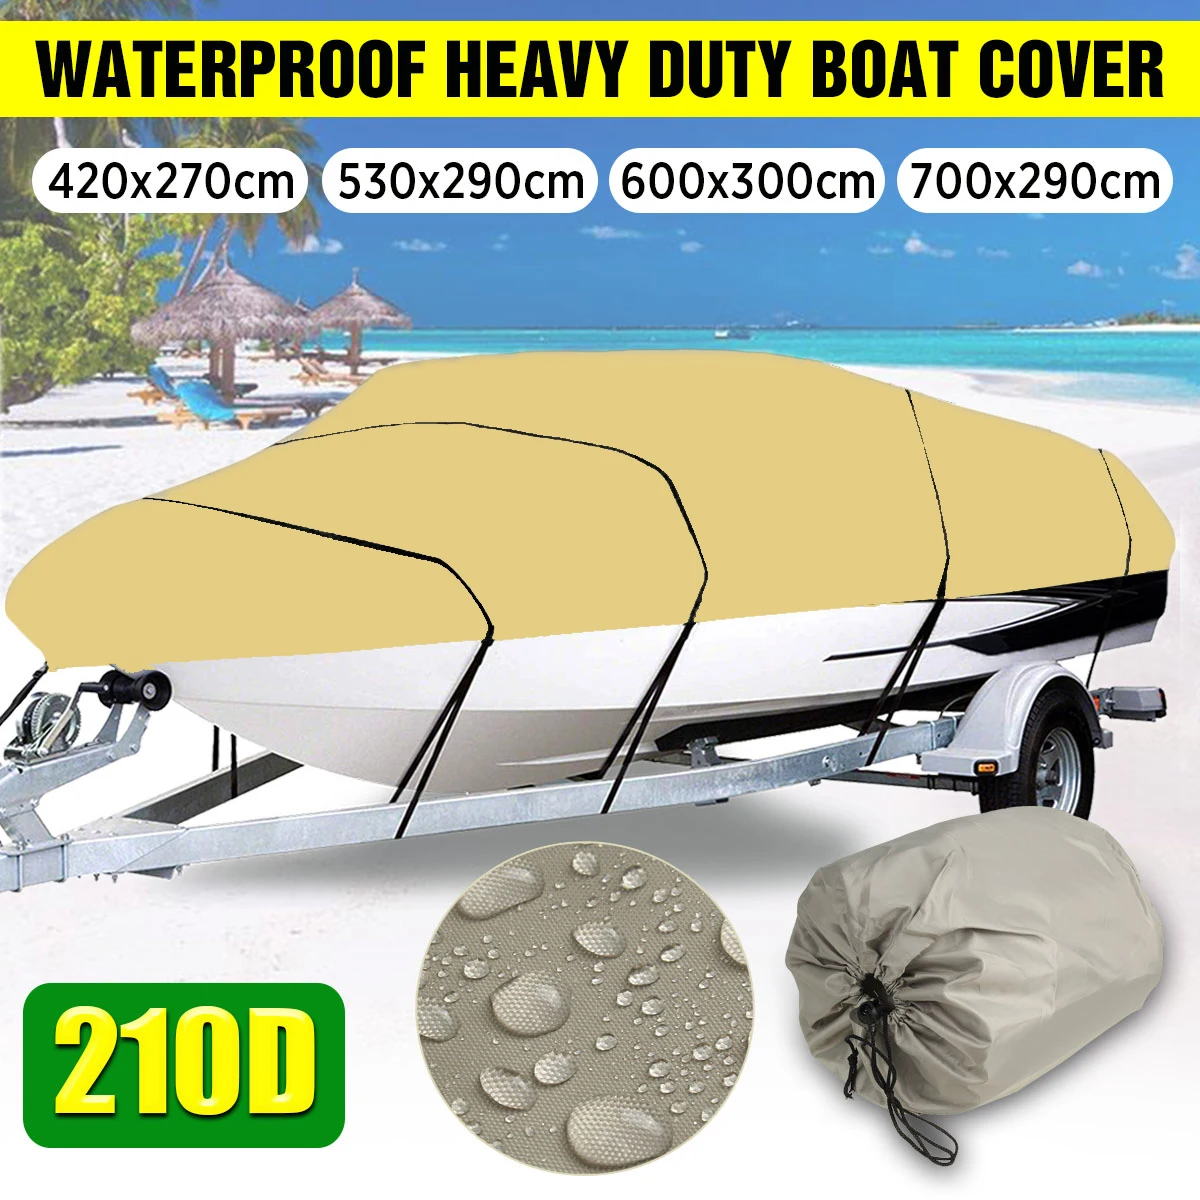 210D 11-22FT Heavy Duty Boat Cover For Fish Ski Bass V-Hull Runabouts Waterproof